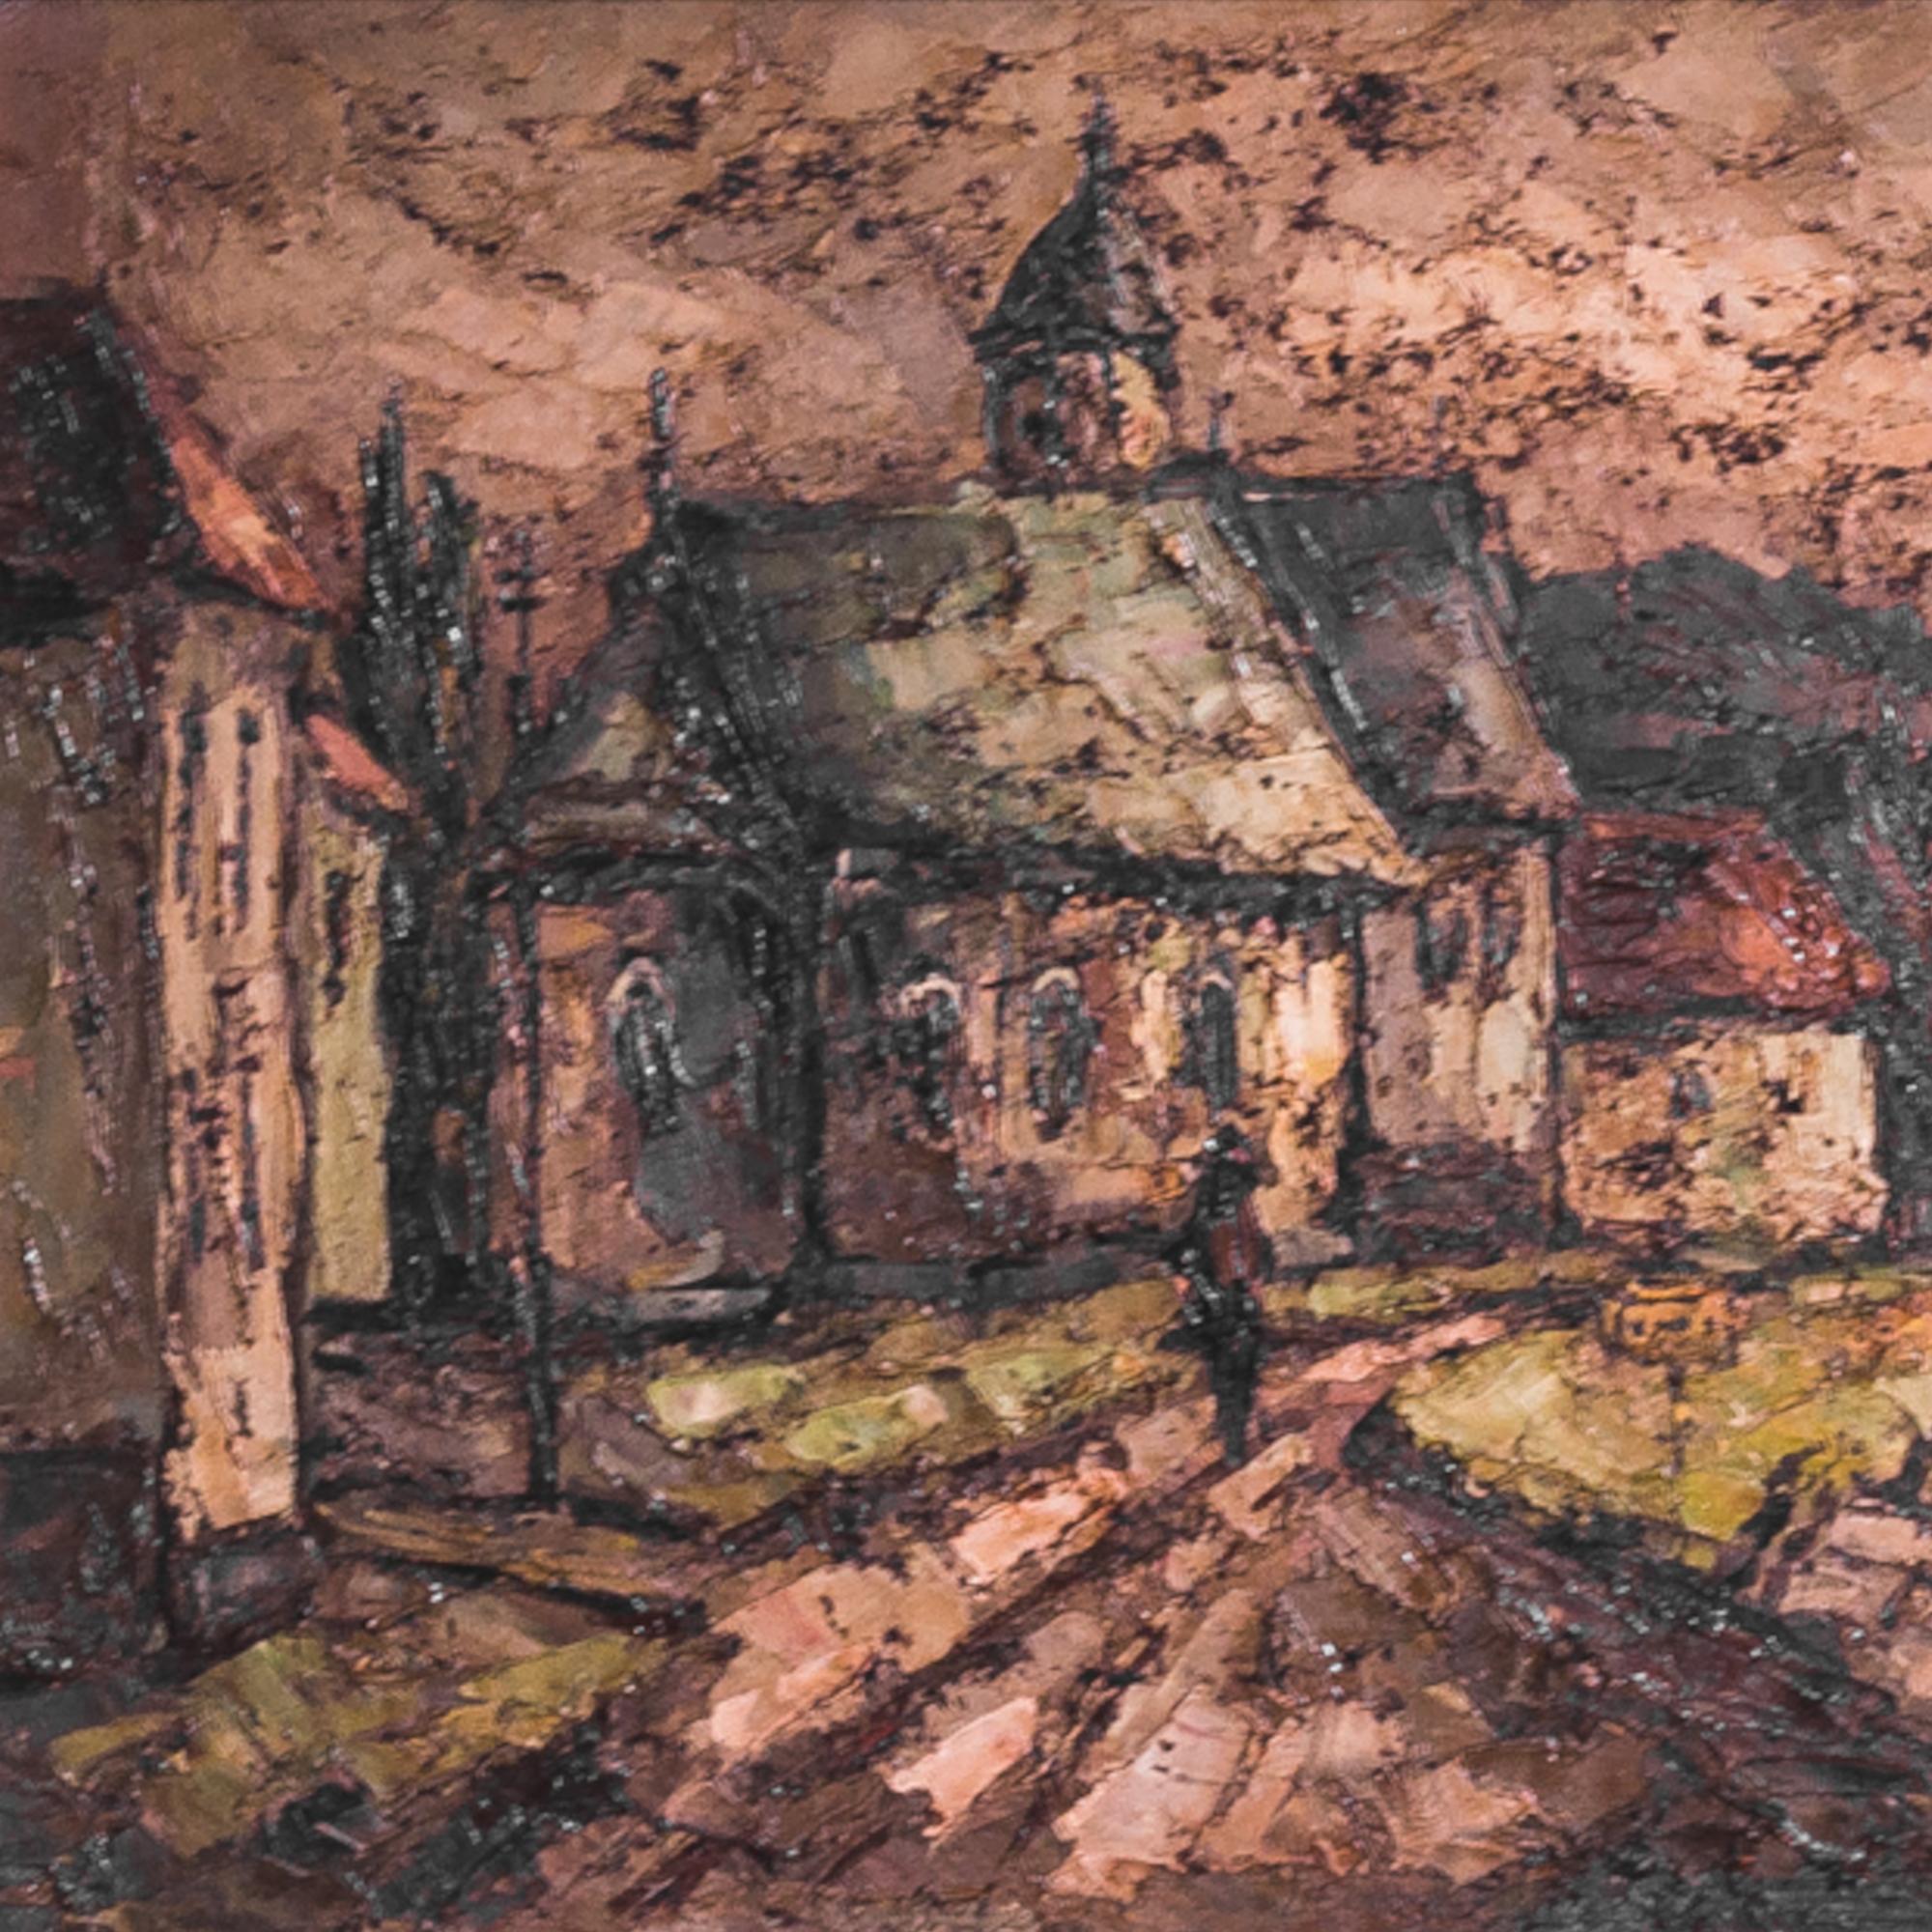 An oil painting produced in Belgium, circa 1950, depicting a provincial landscape. The frame is made of tinted wood with a gilded rim, its burgundy color echoing the reddish undertones of the painting. The paint is applied ‘impasto’ and captures the